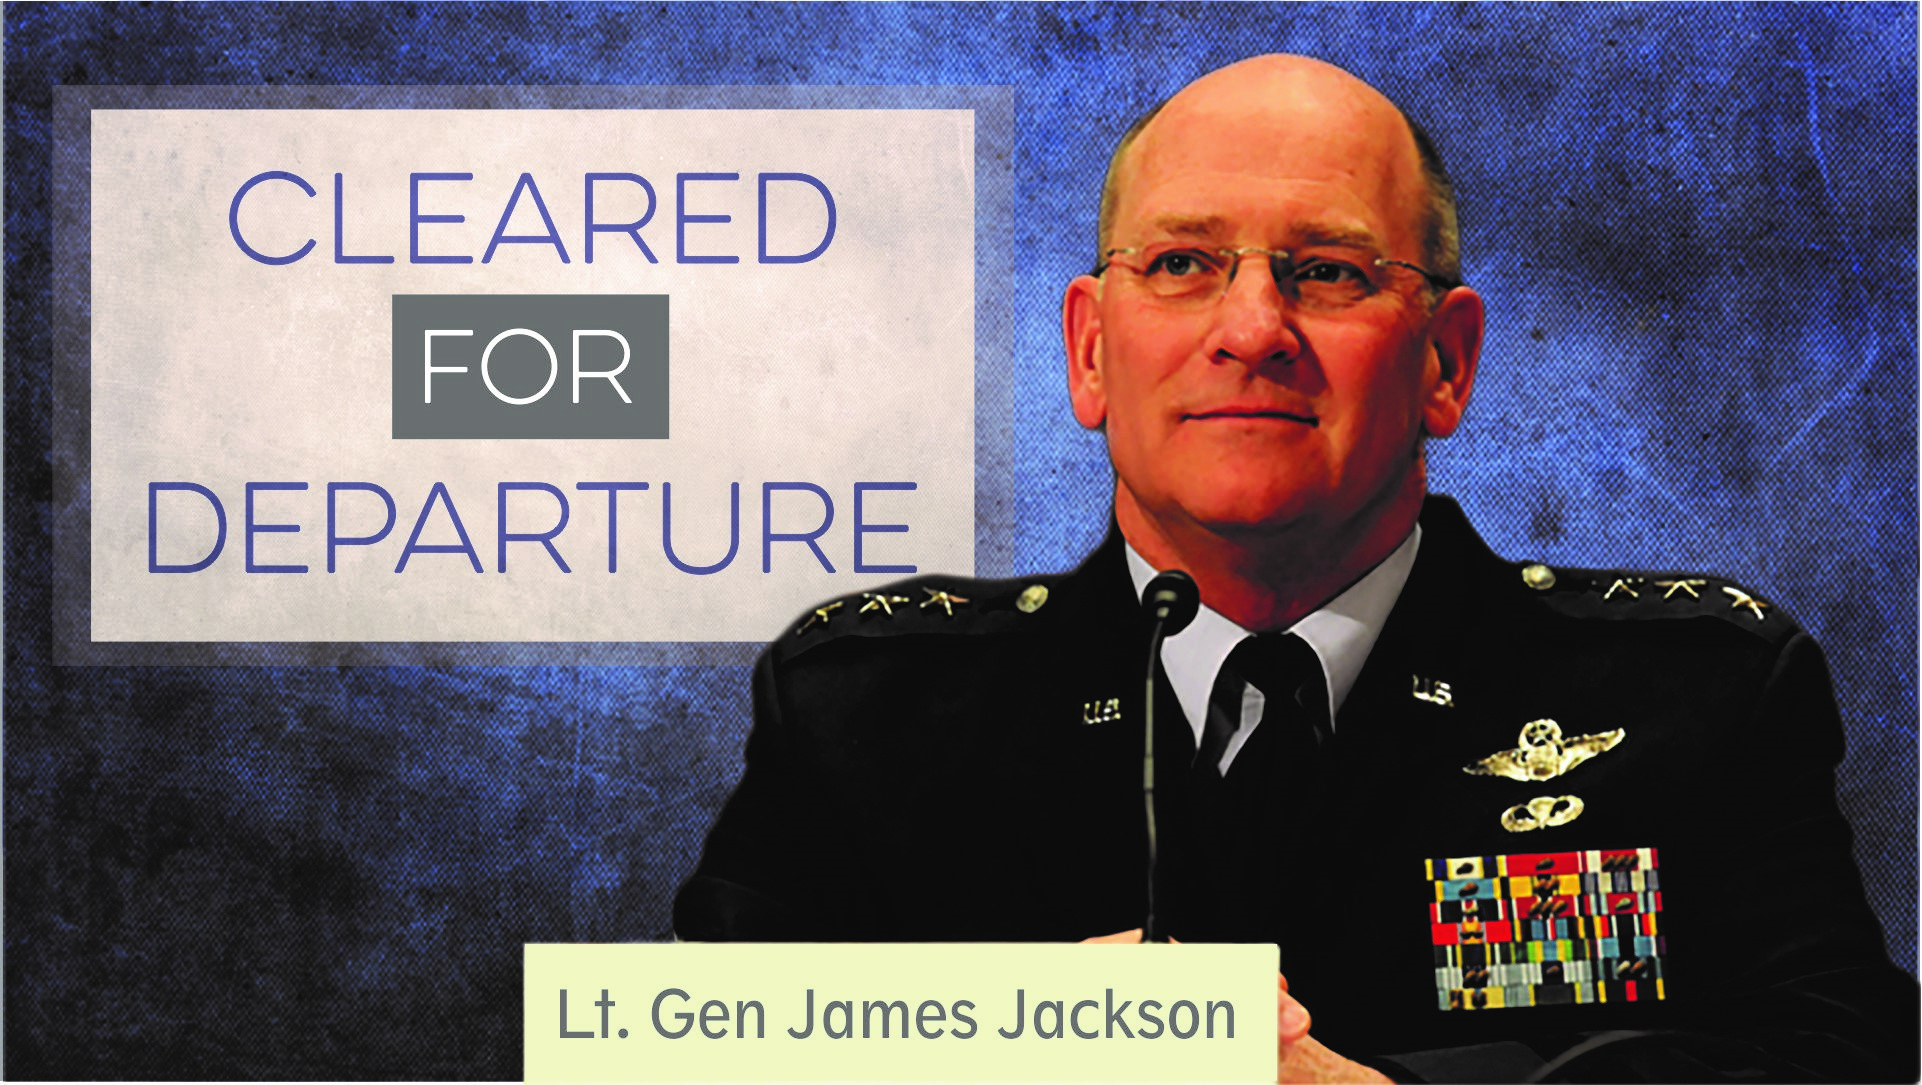 Air Force Lt. Gen. James “JJ” Jackson, former Commander of Air Force Reserve Command, reflects on his 38 years of service.